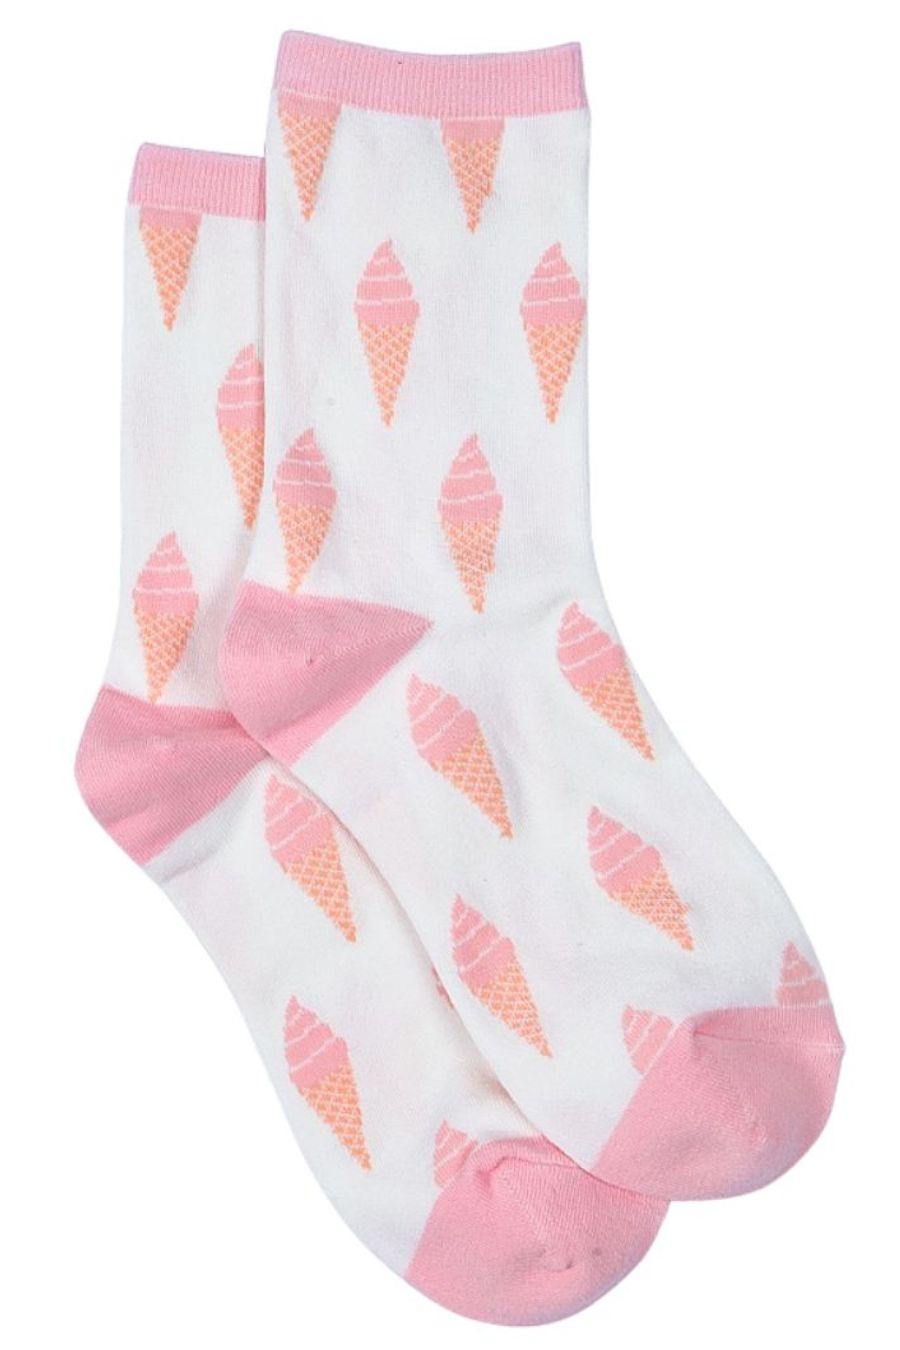 white, pink ankle socks with a pink ice cream cone pattern 